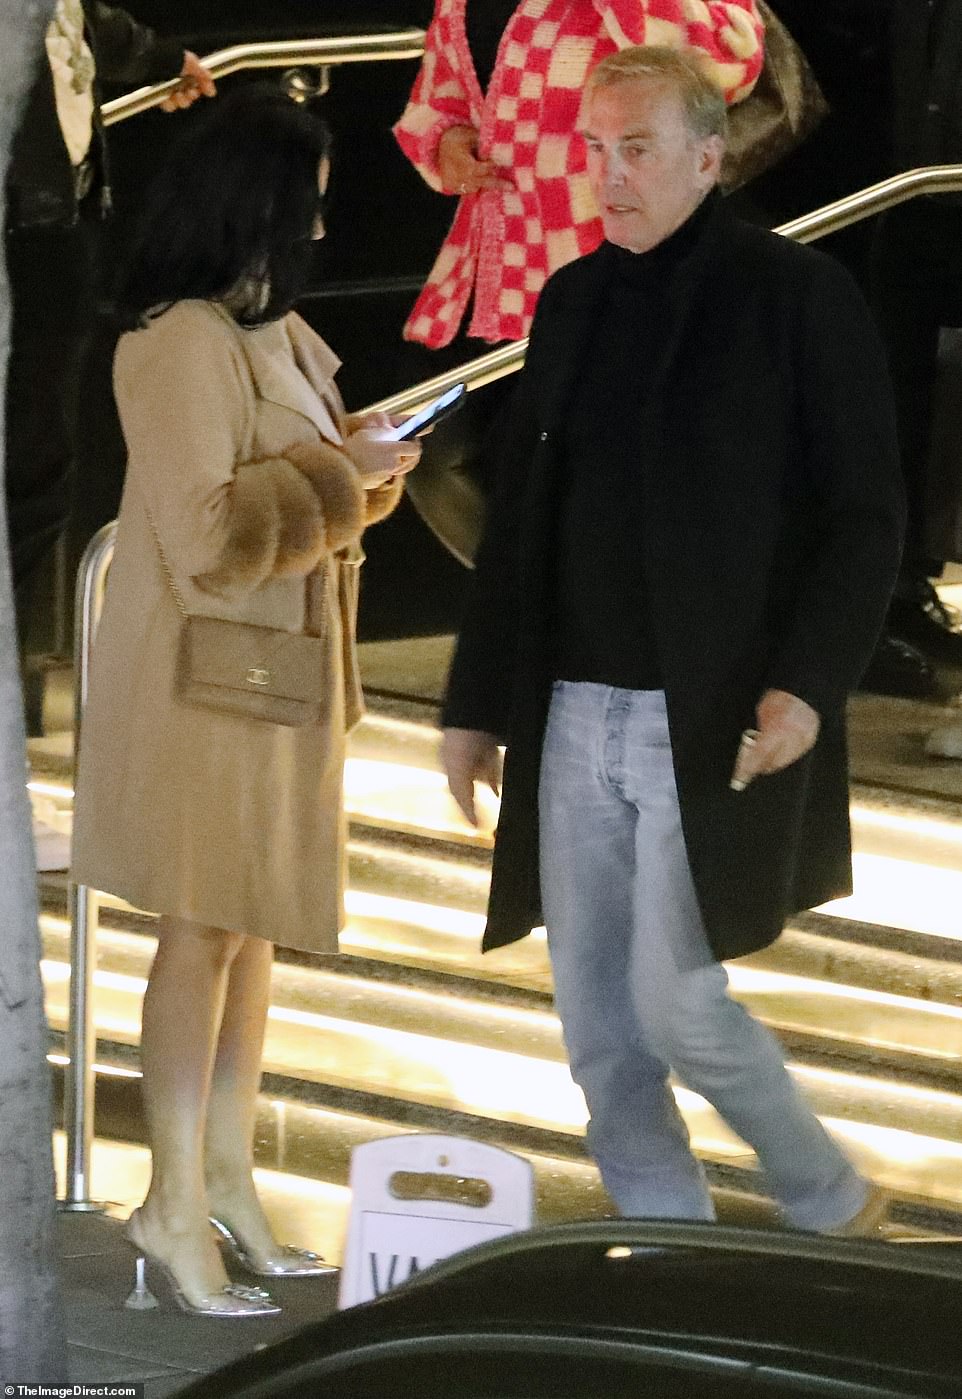 Costner was seen leaving separately before standing near a mystery woman wearing Cinderella shoes.